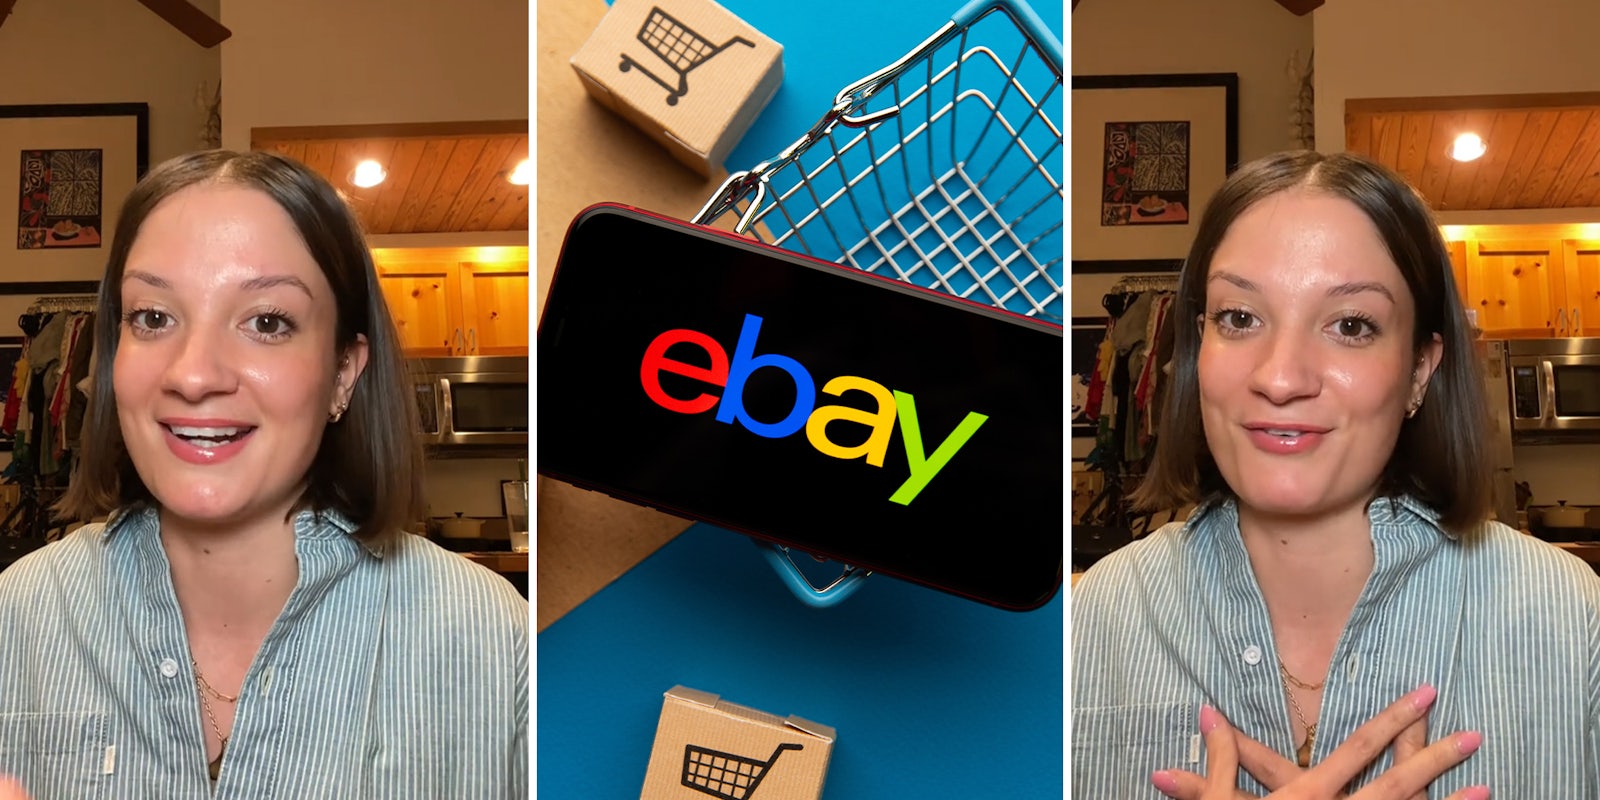 Buyer catches eBay and Poshmark seller fraudulently trying to raise price on coat